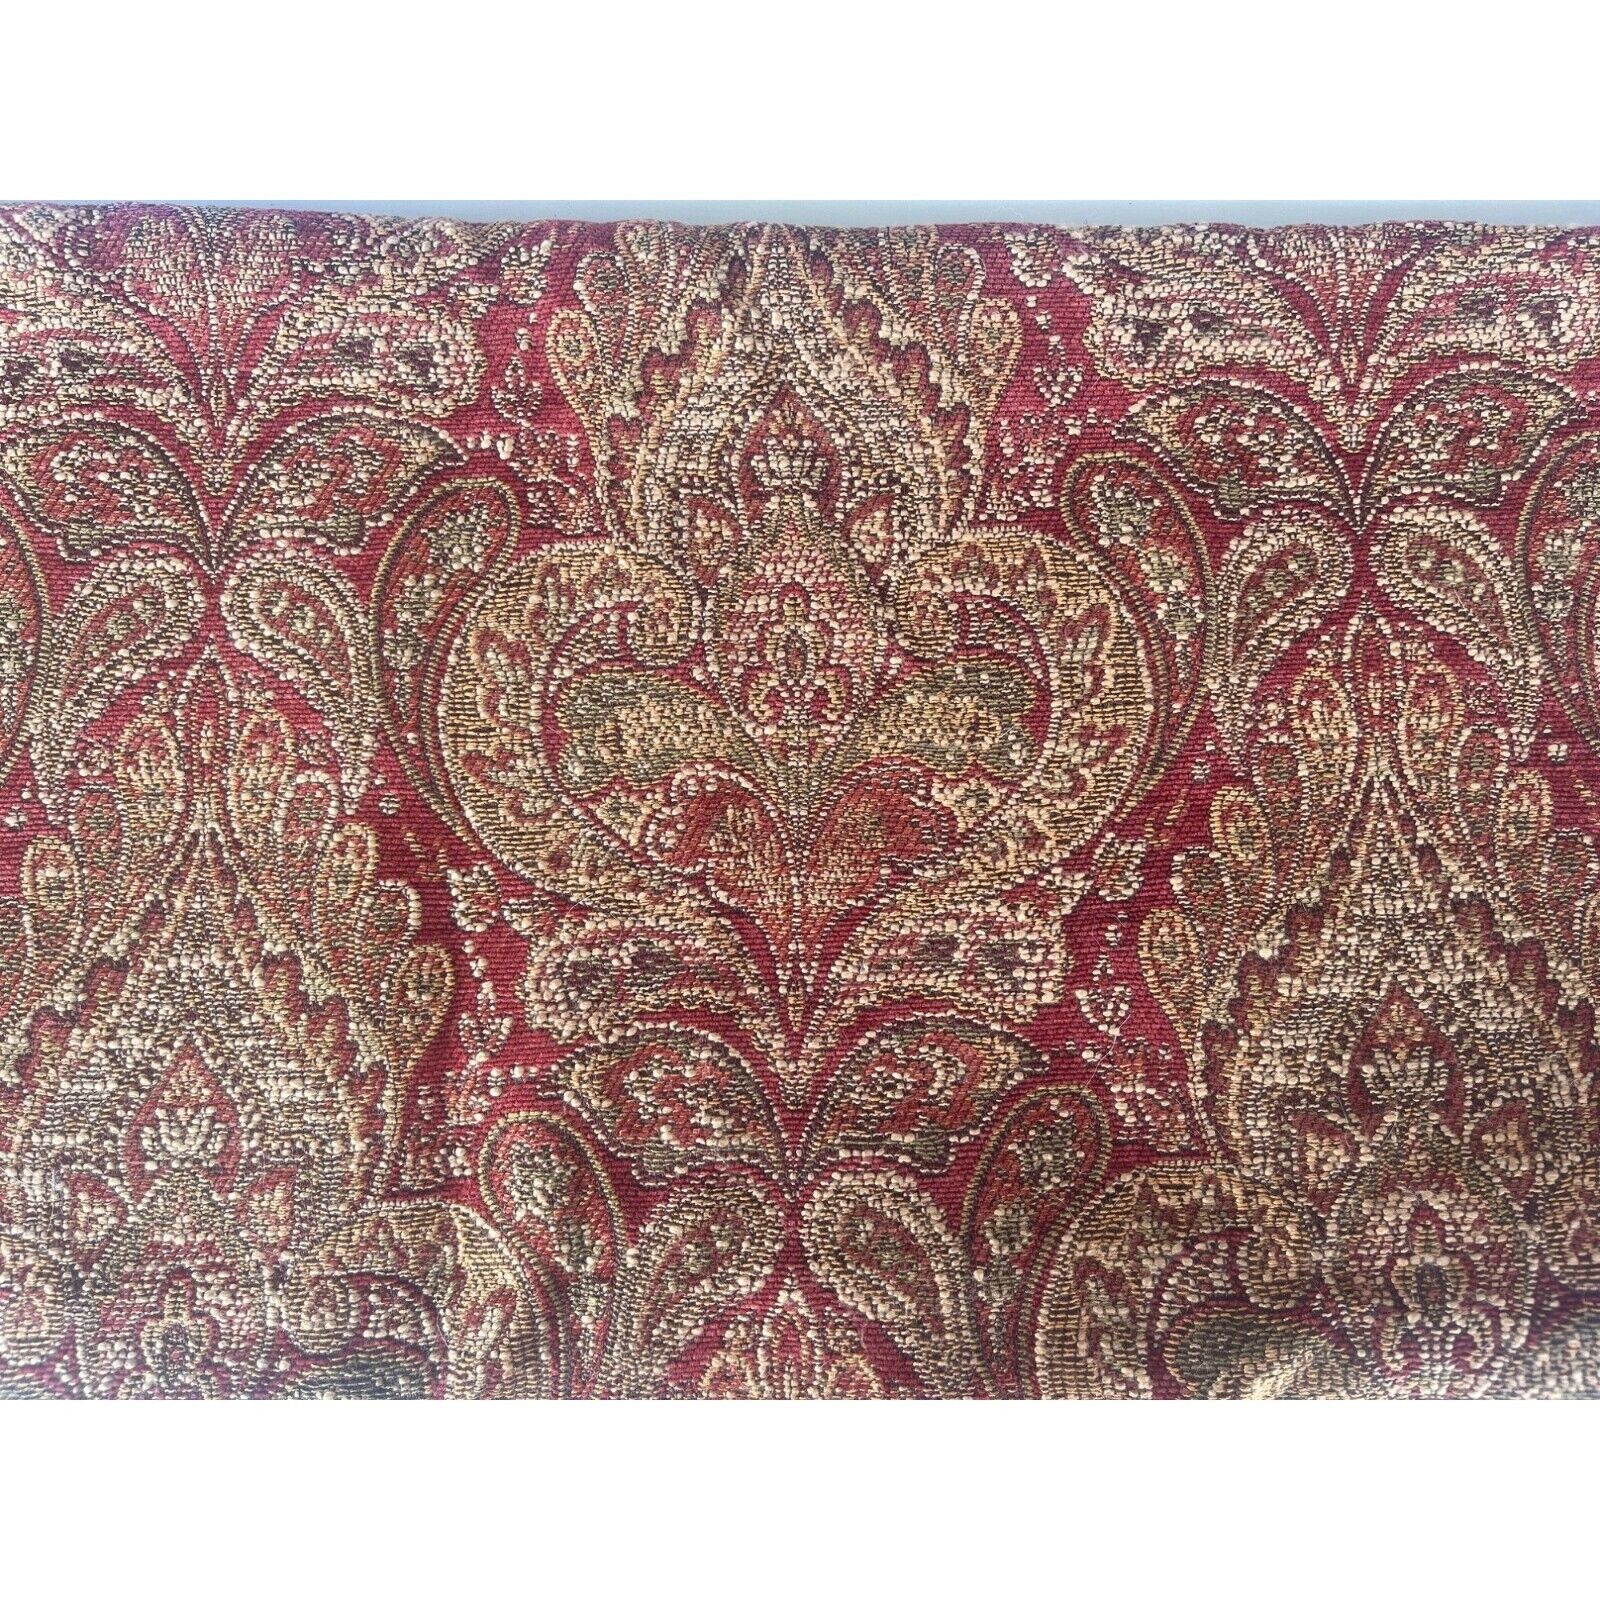 Vintage Fabric Tapestry Upholstery Drapery Paisley Maroon Gold Yellow